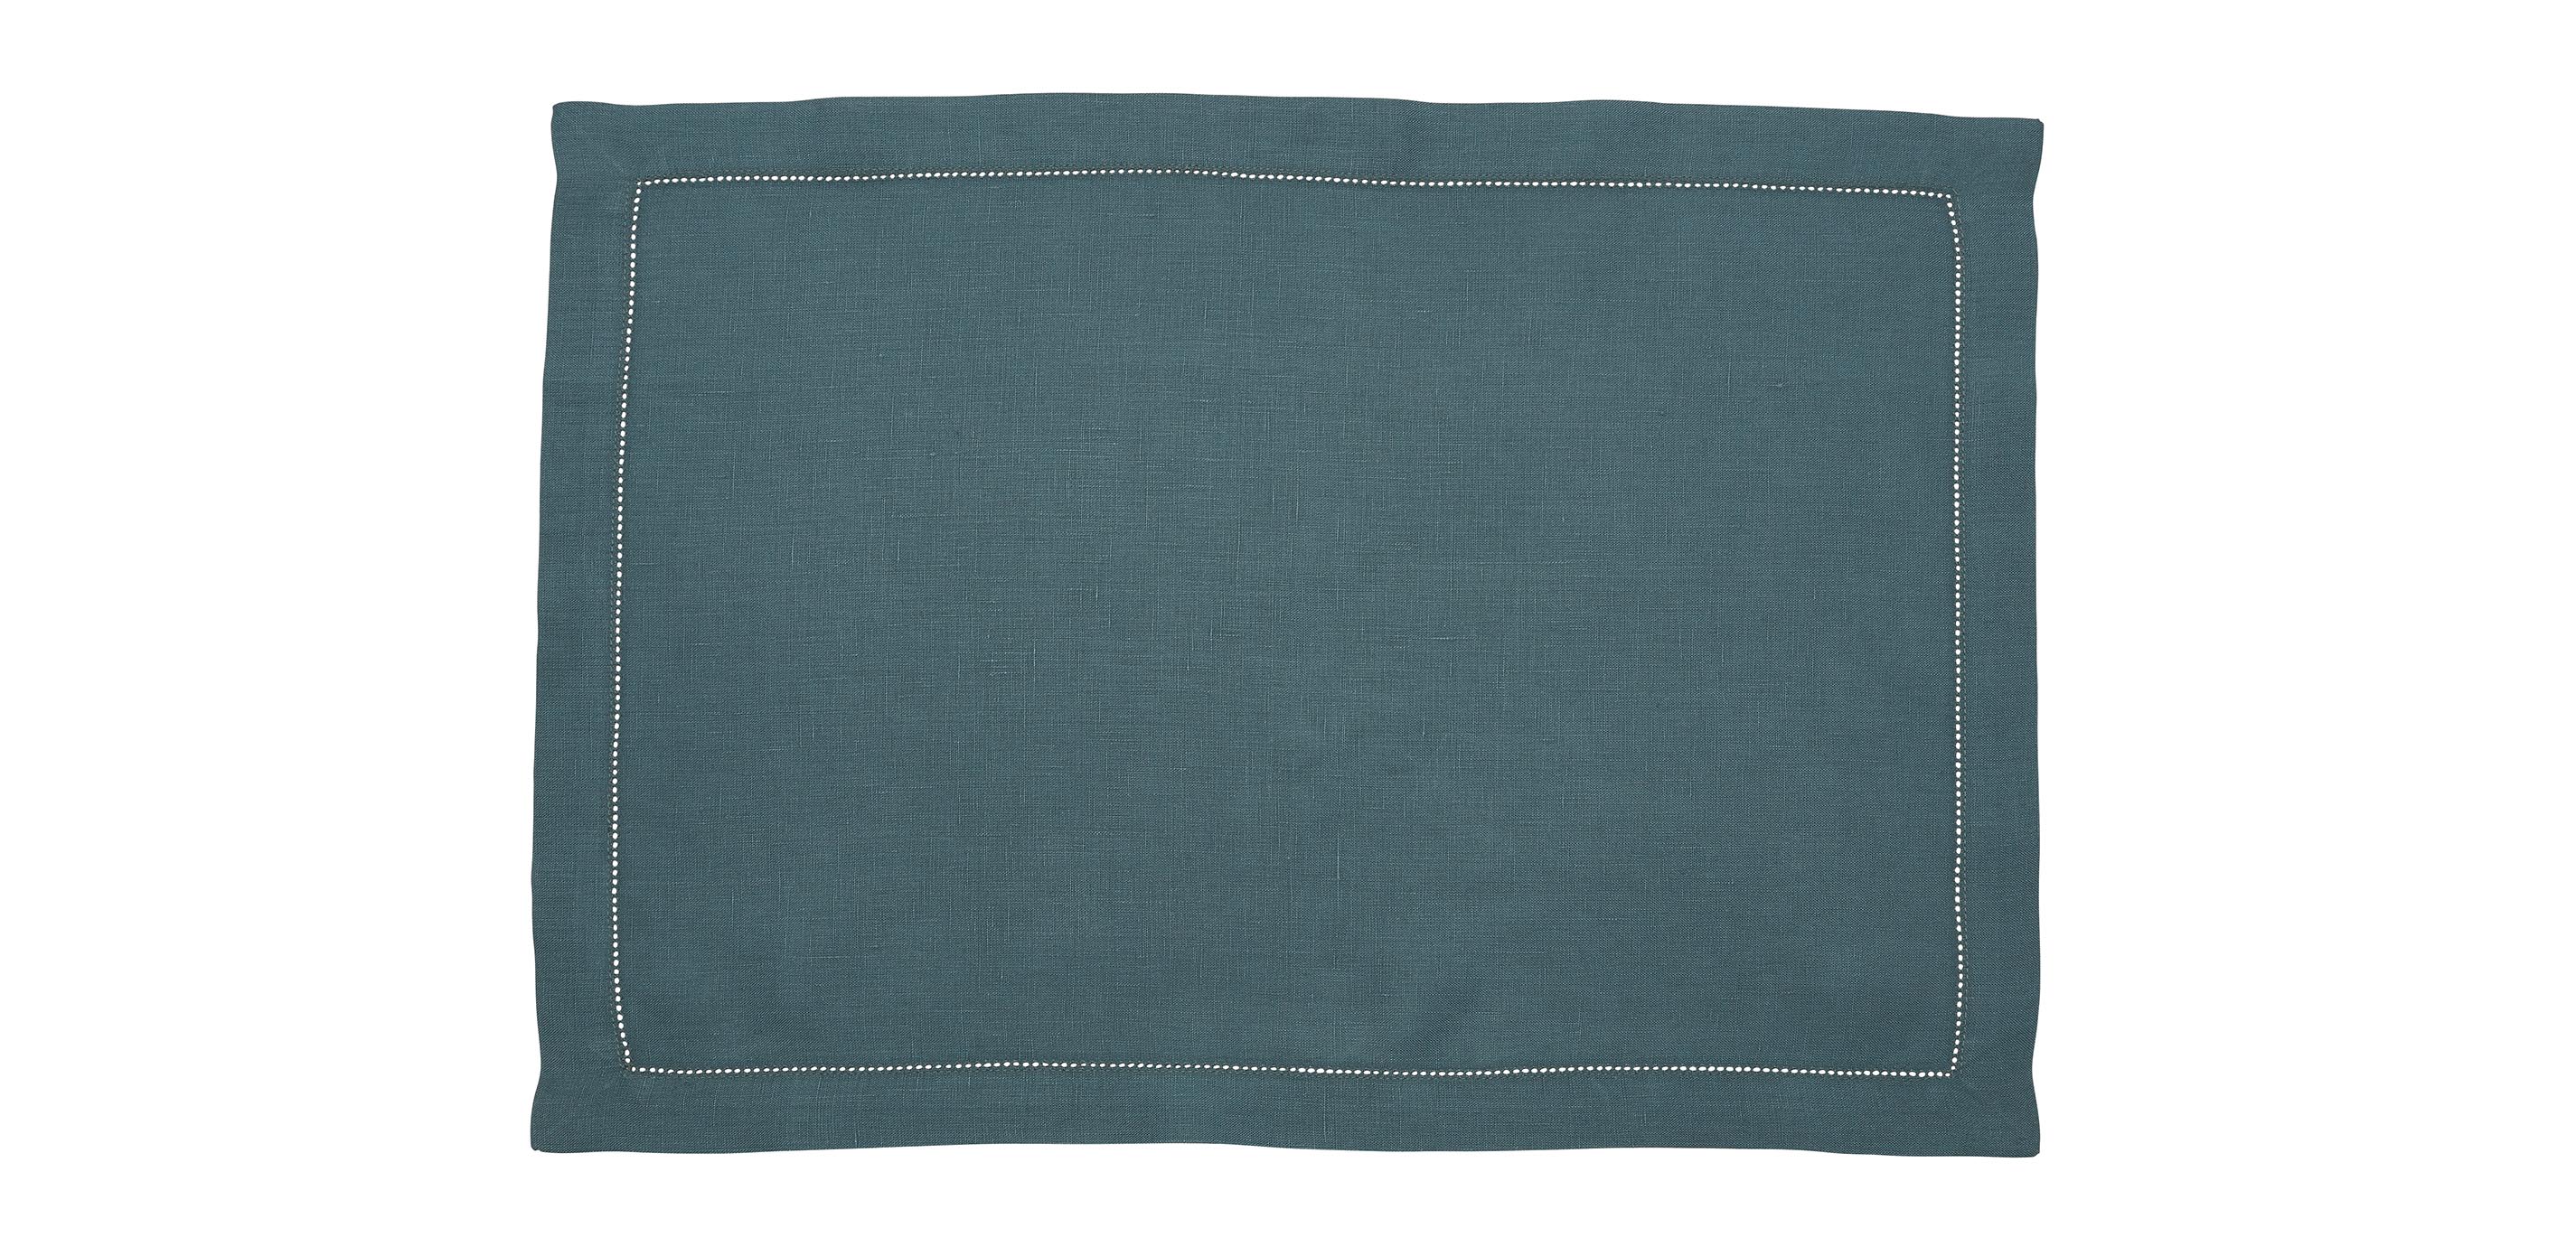 Provenza Cloth Placemats